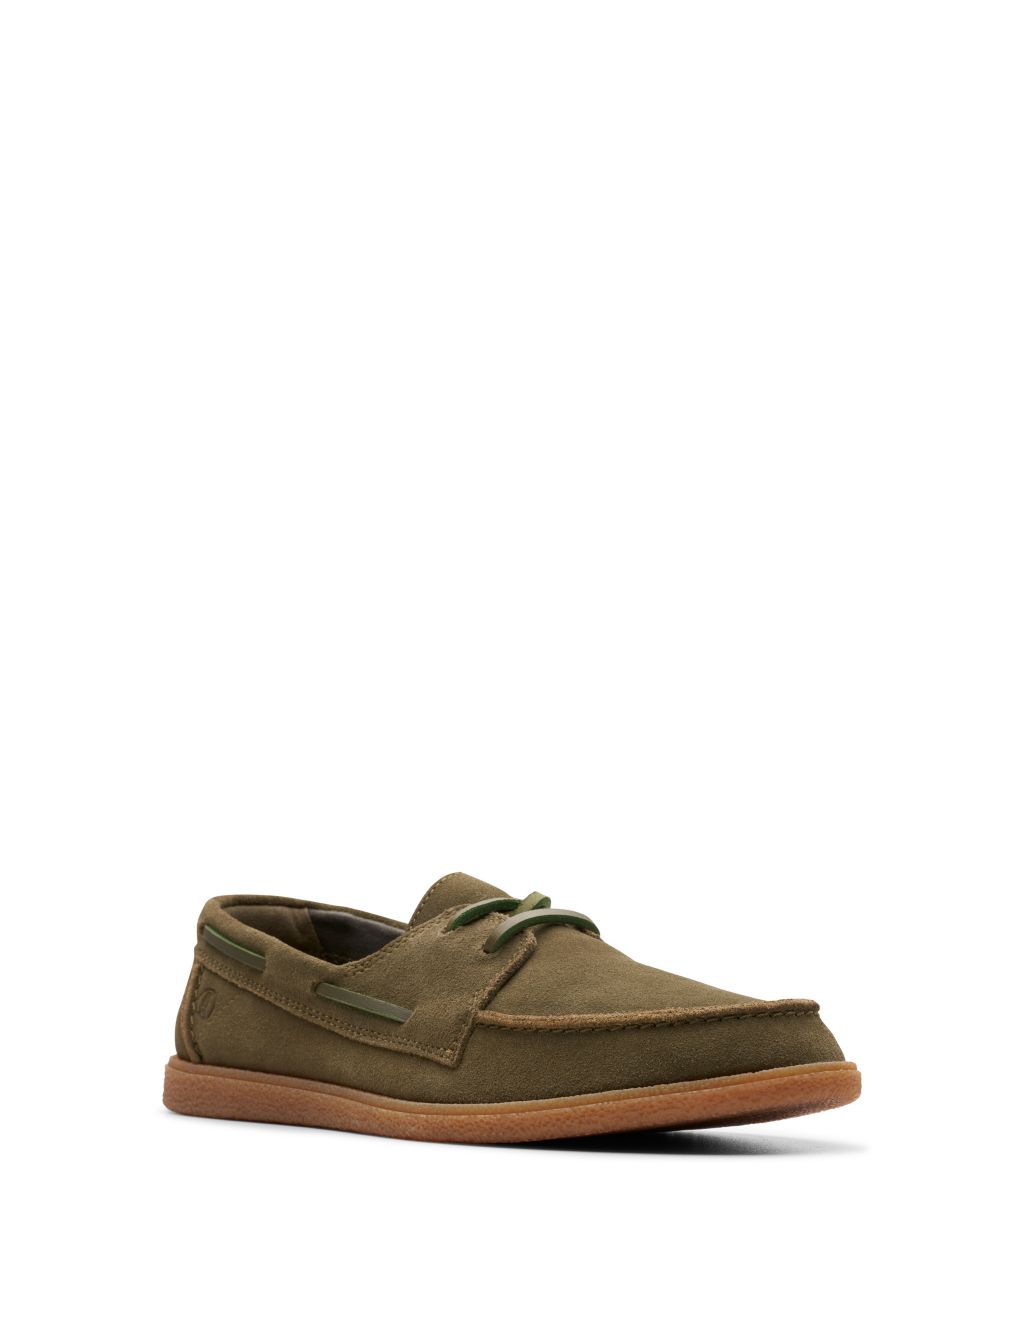 Suede Boat Shoes 2 of 6